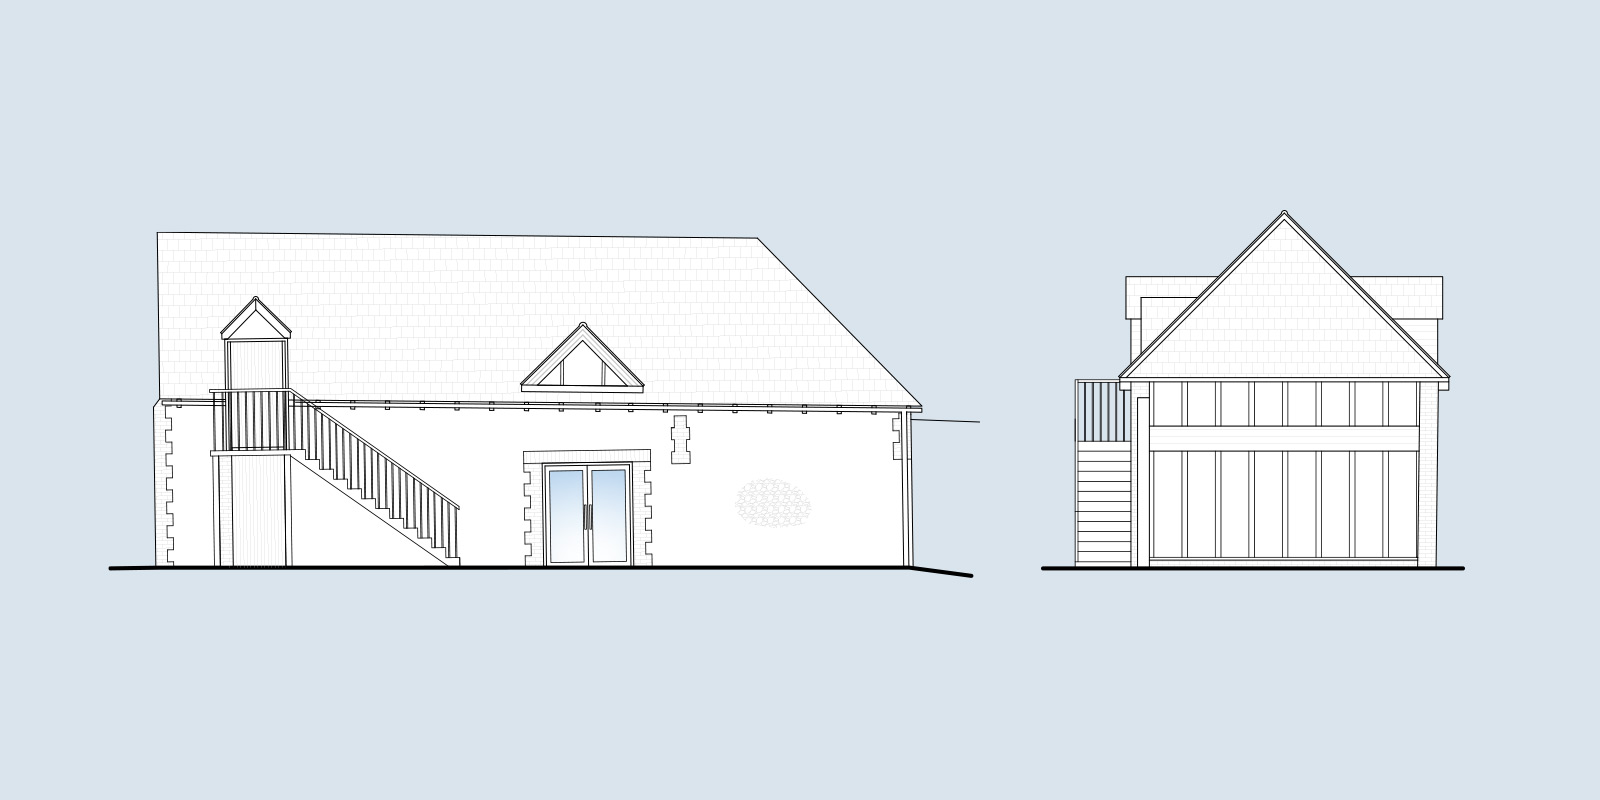 Planning Approval - Bike Hire - Seven Sisters Country Park - 01